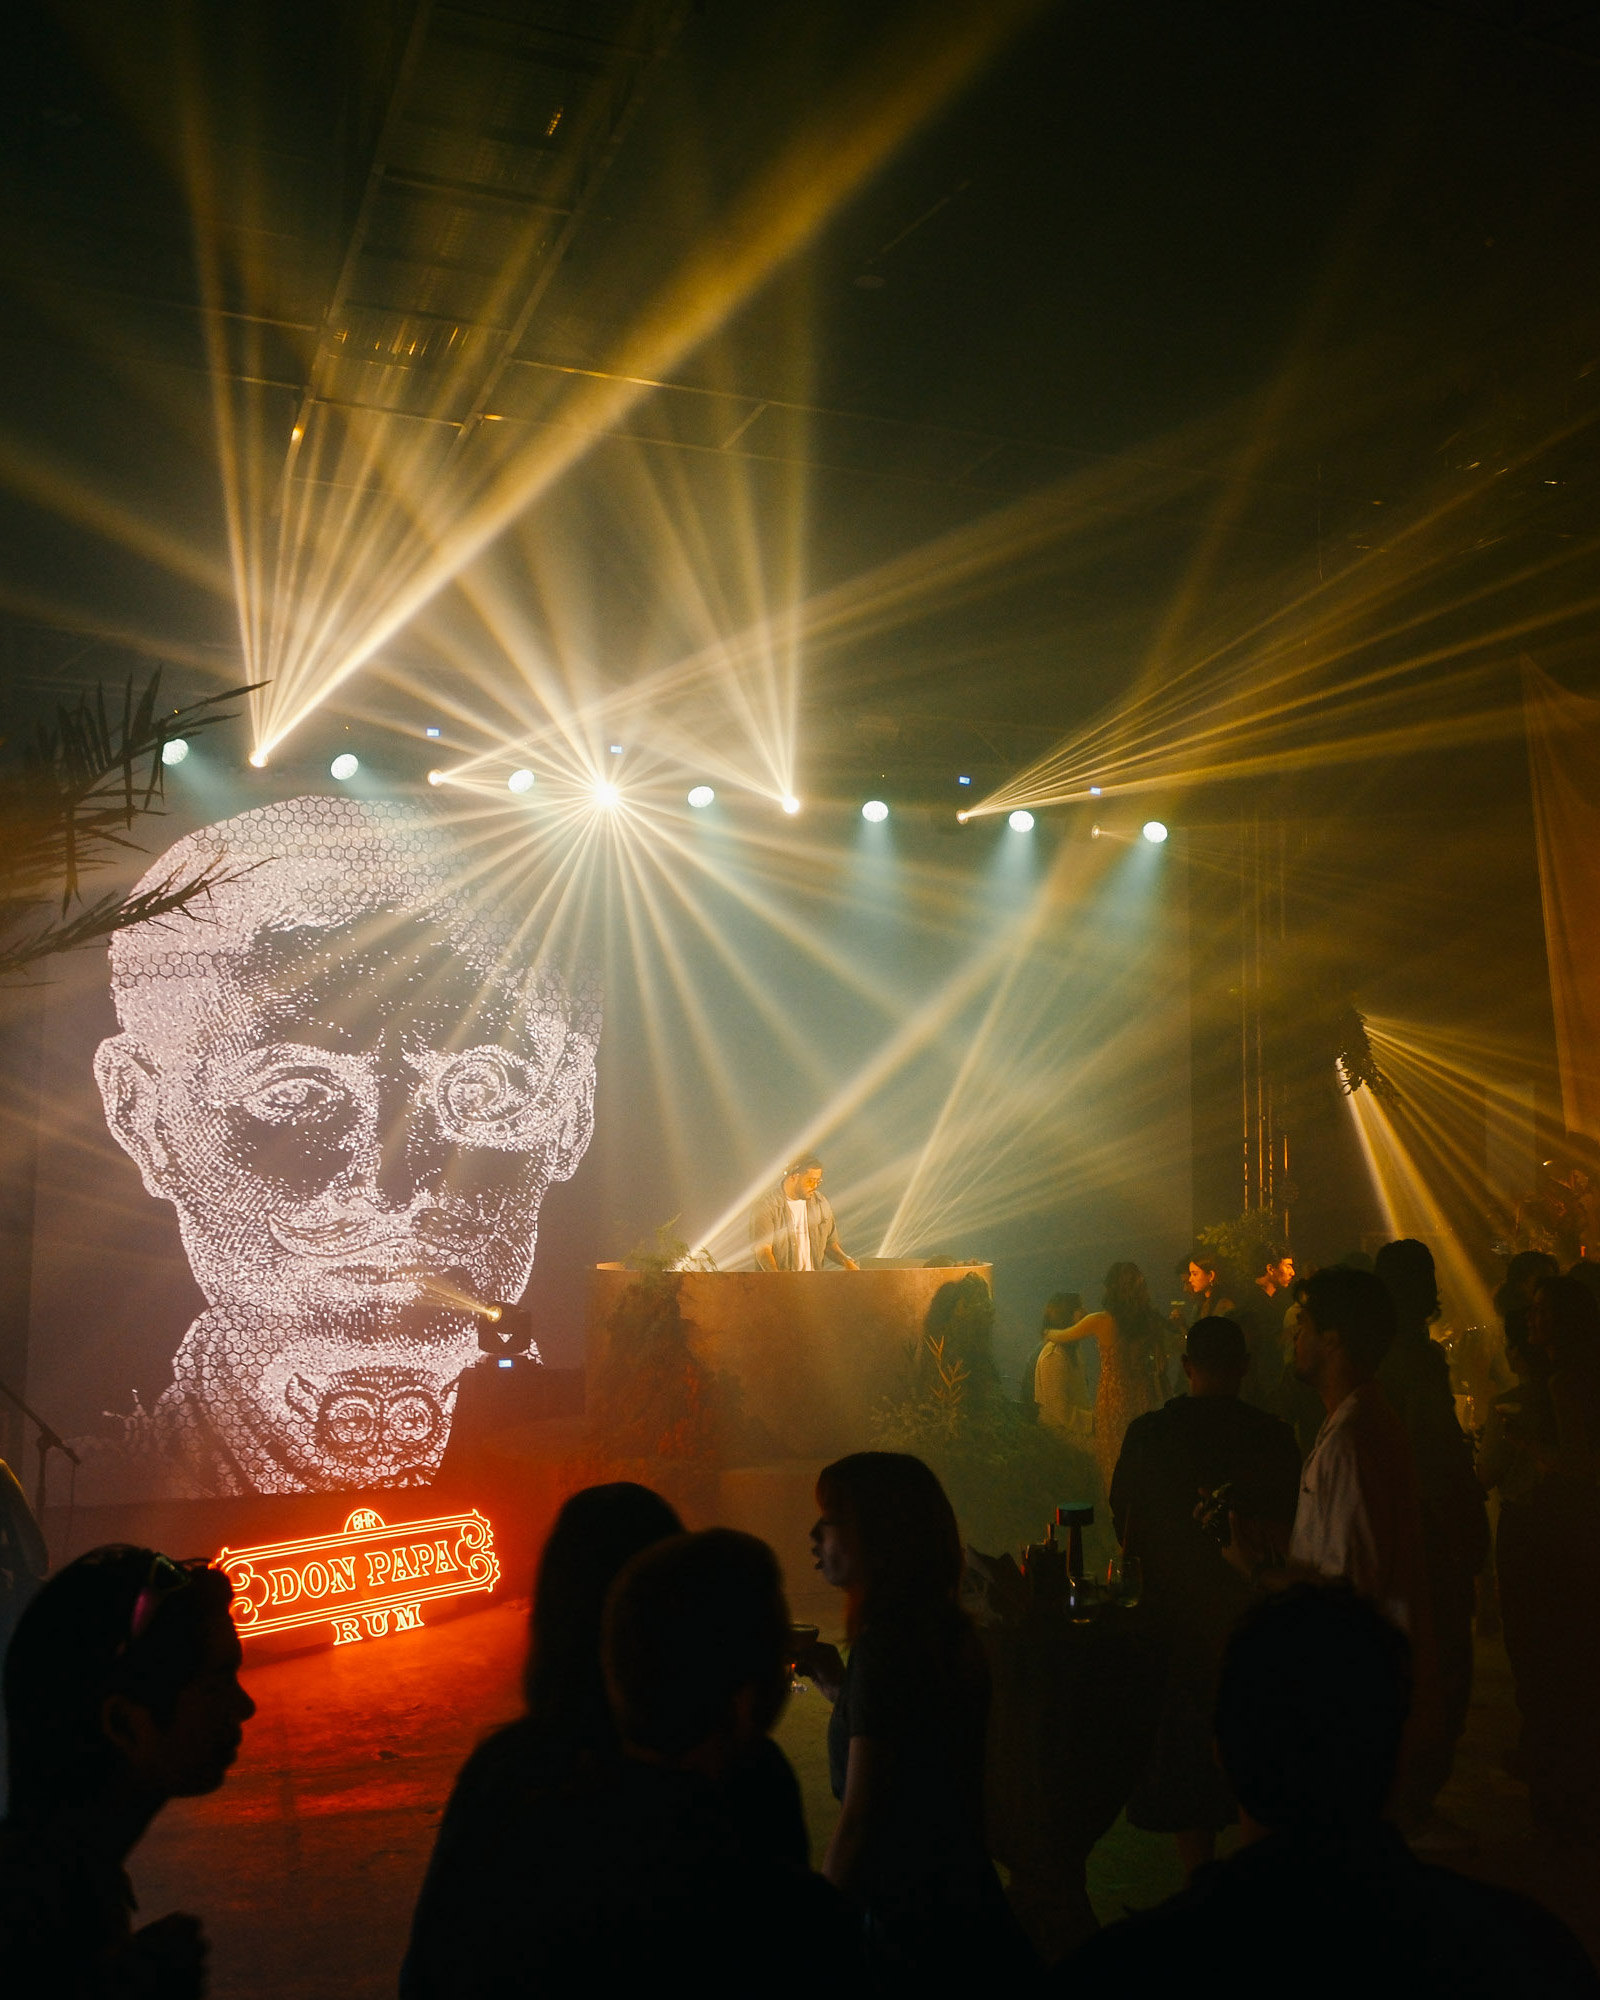 A DJ playing music for guests of Don Papa Rum set against a light show and Papa Isio's image